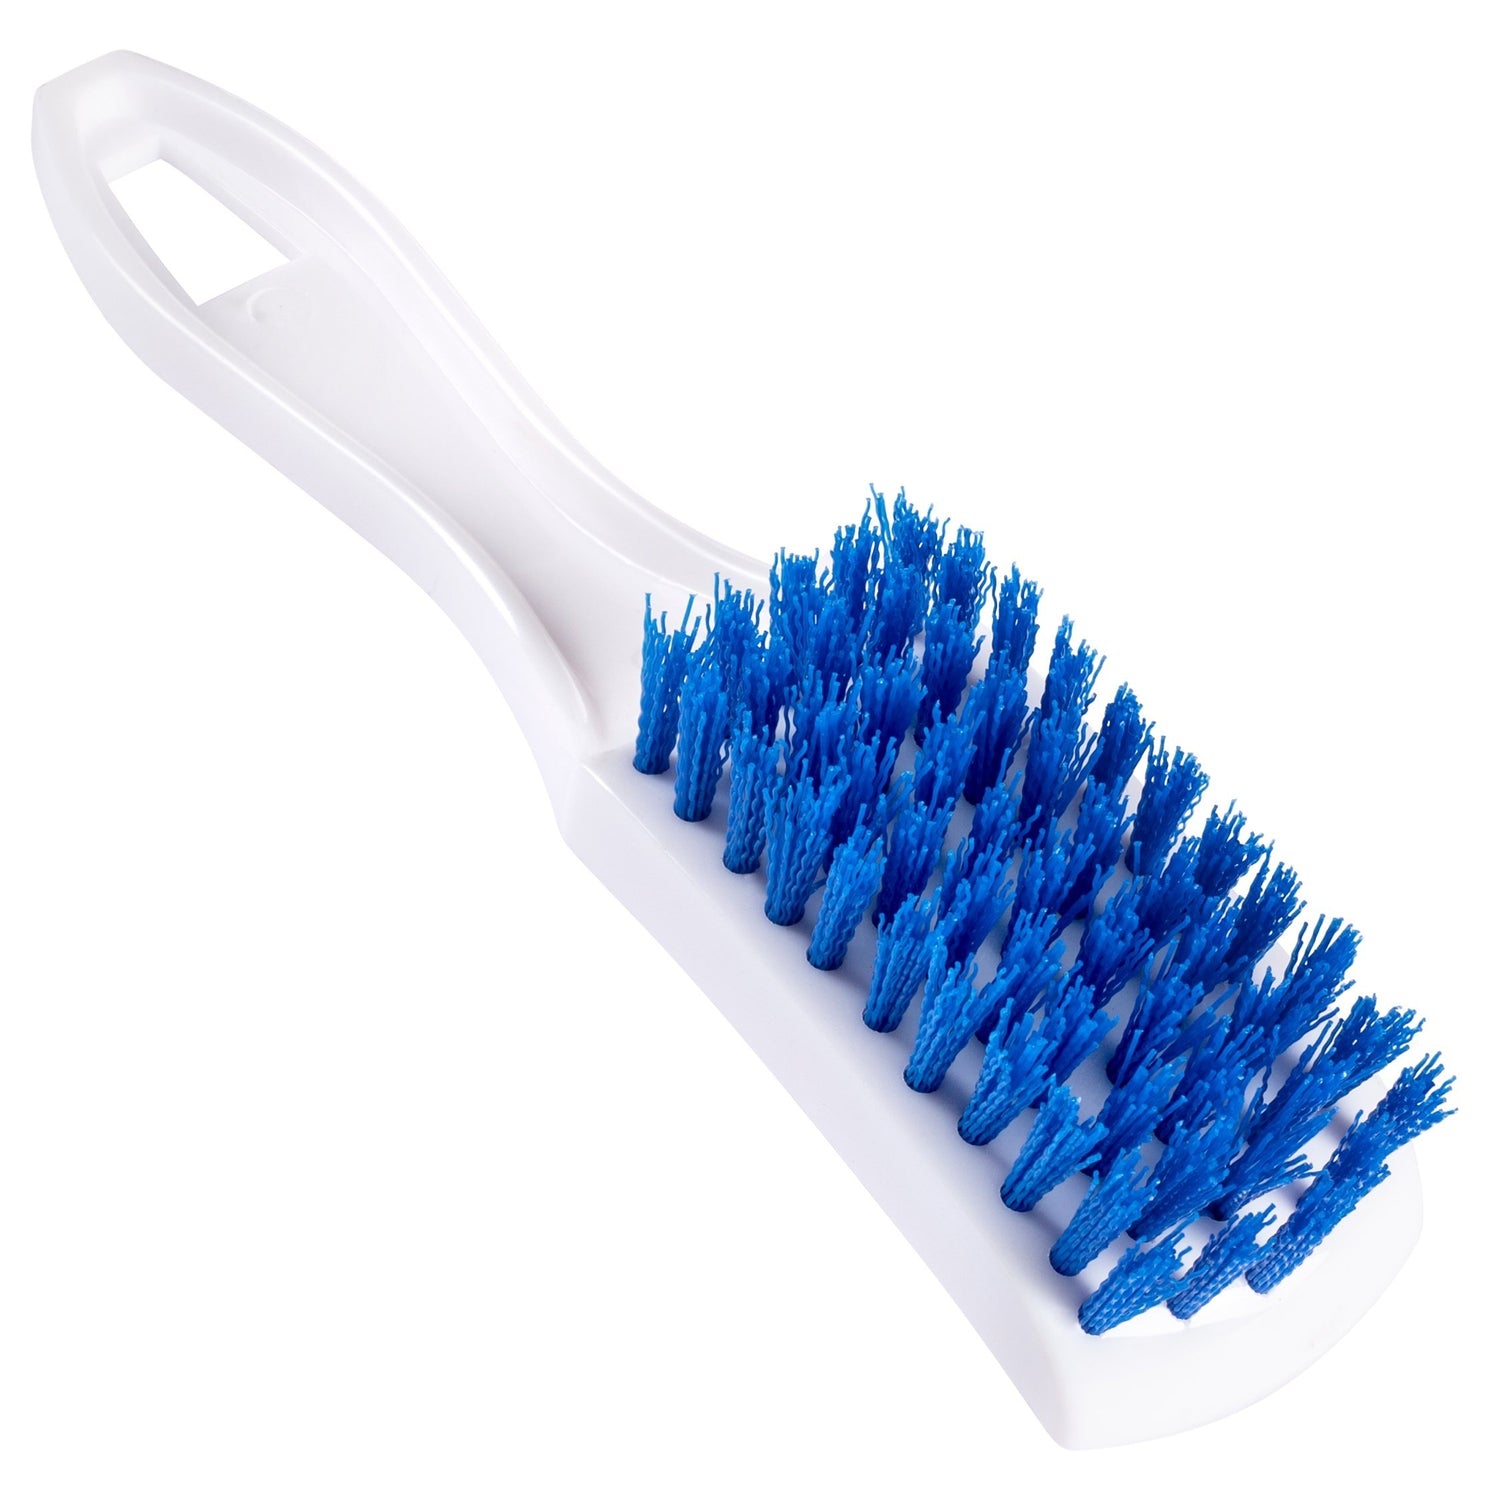 When Fuller Brush sold products door-to-door. Remember the hair brush with  clear acrylic handle.